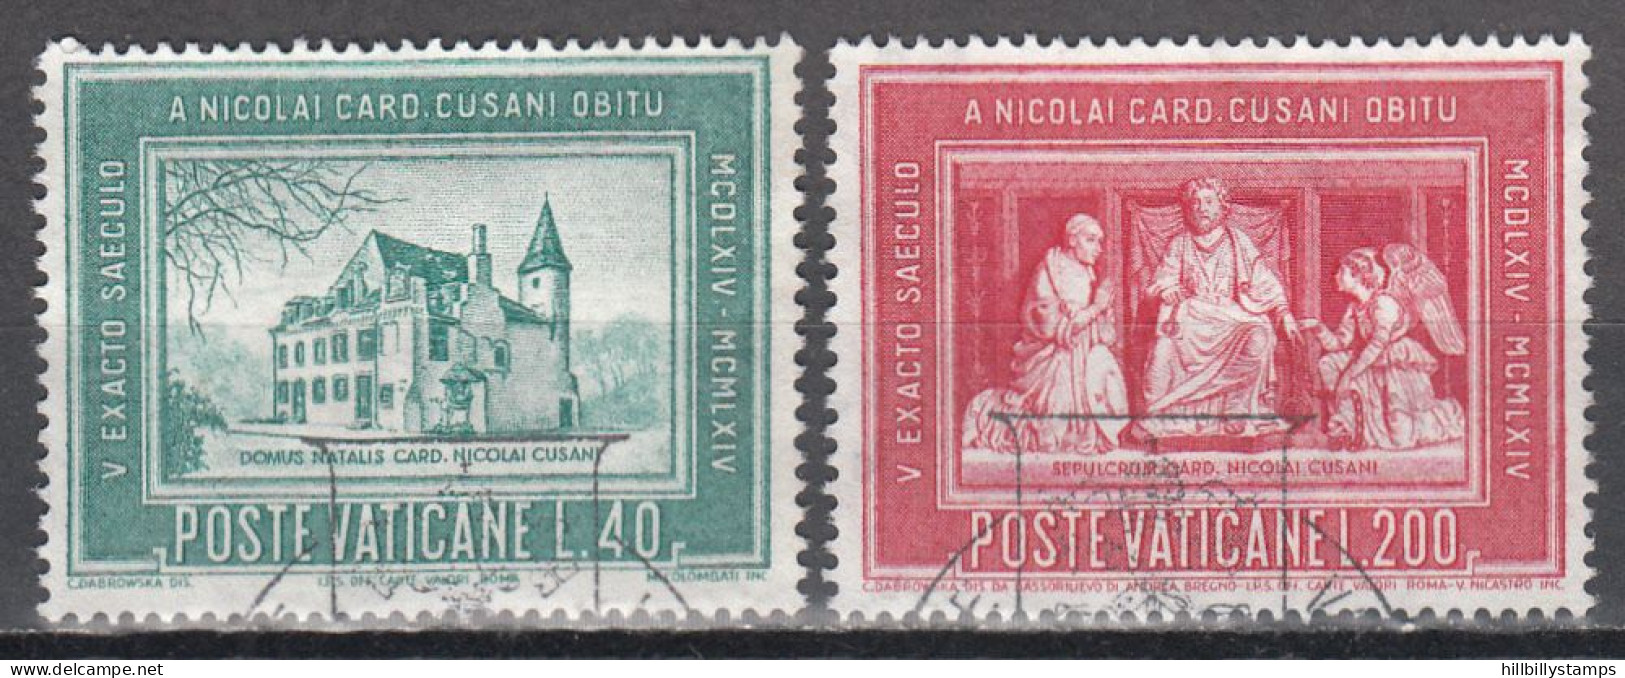 VATICAN   SCOTT NO 395-96  USED   YEAR  1964 - Used Stamps